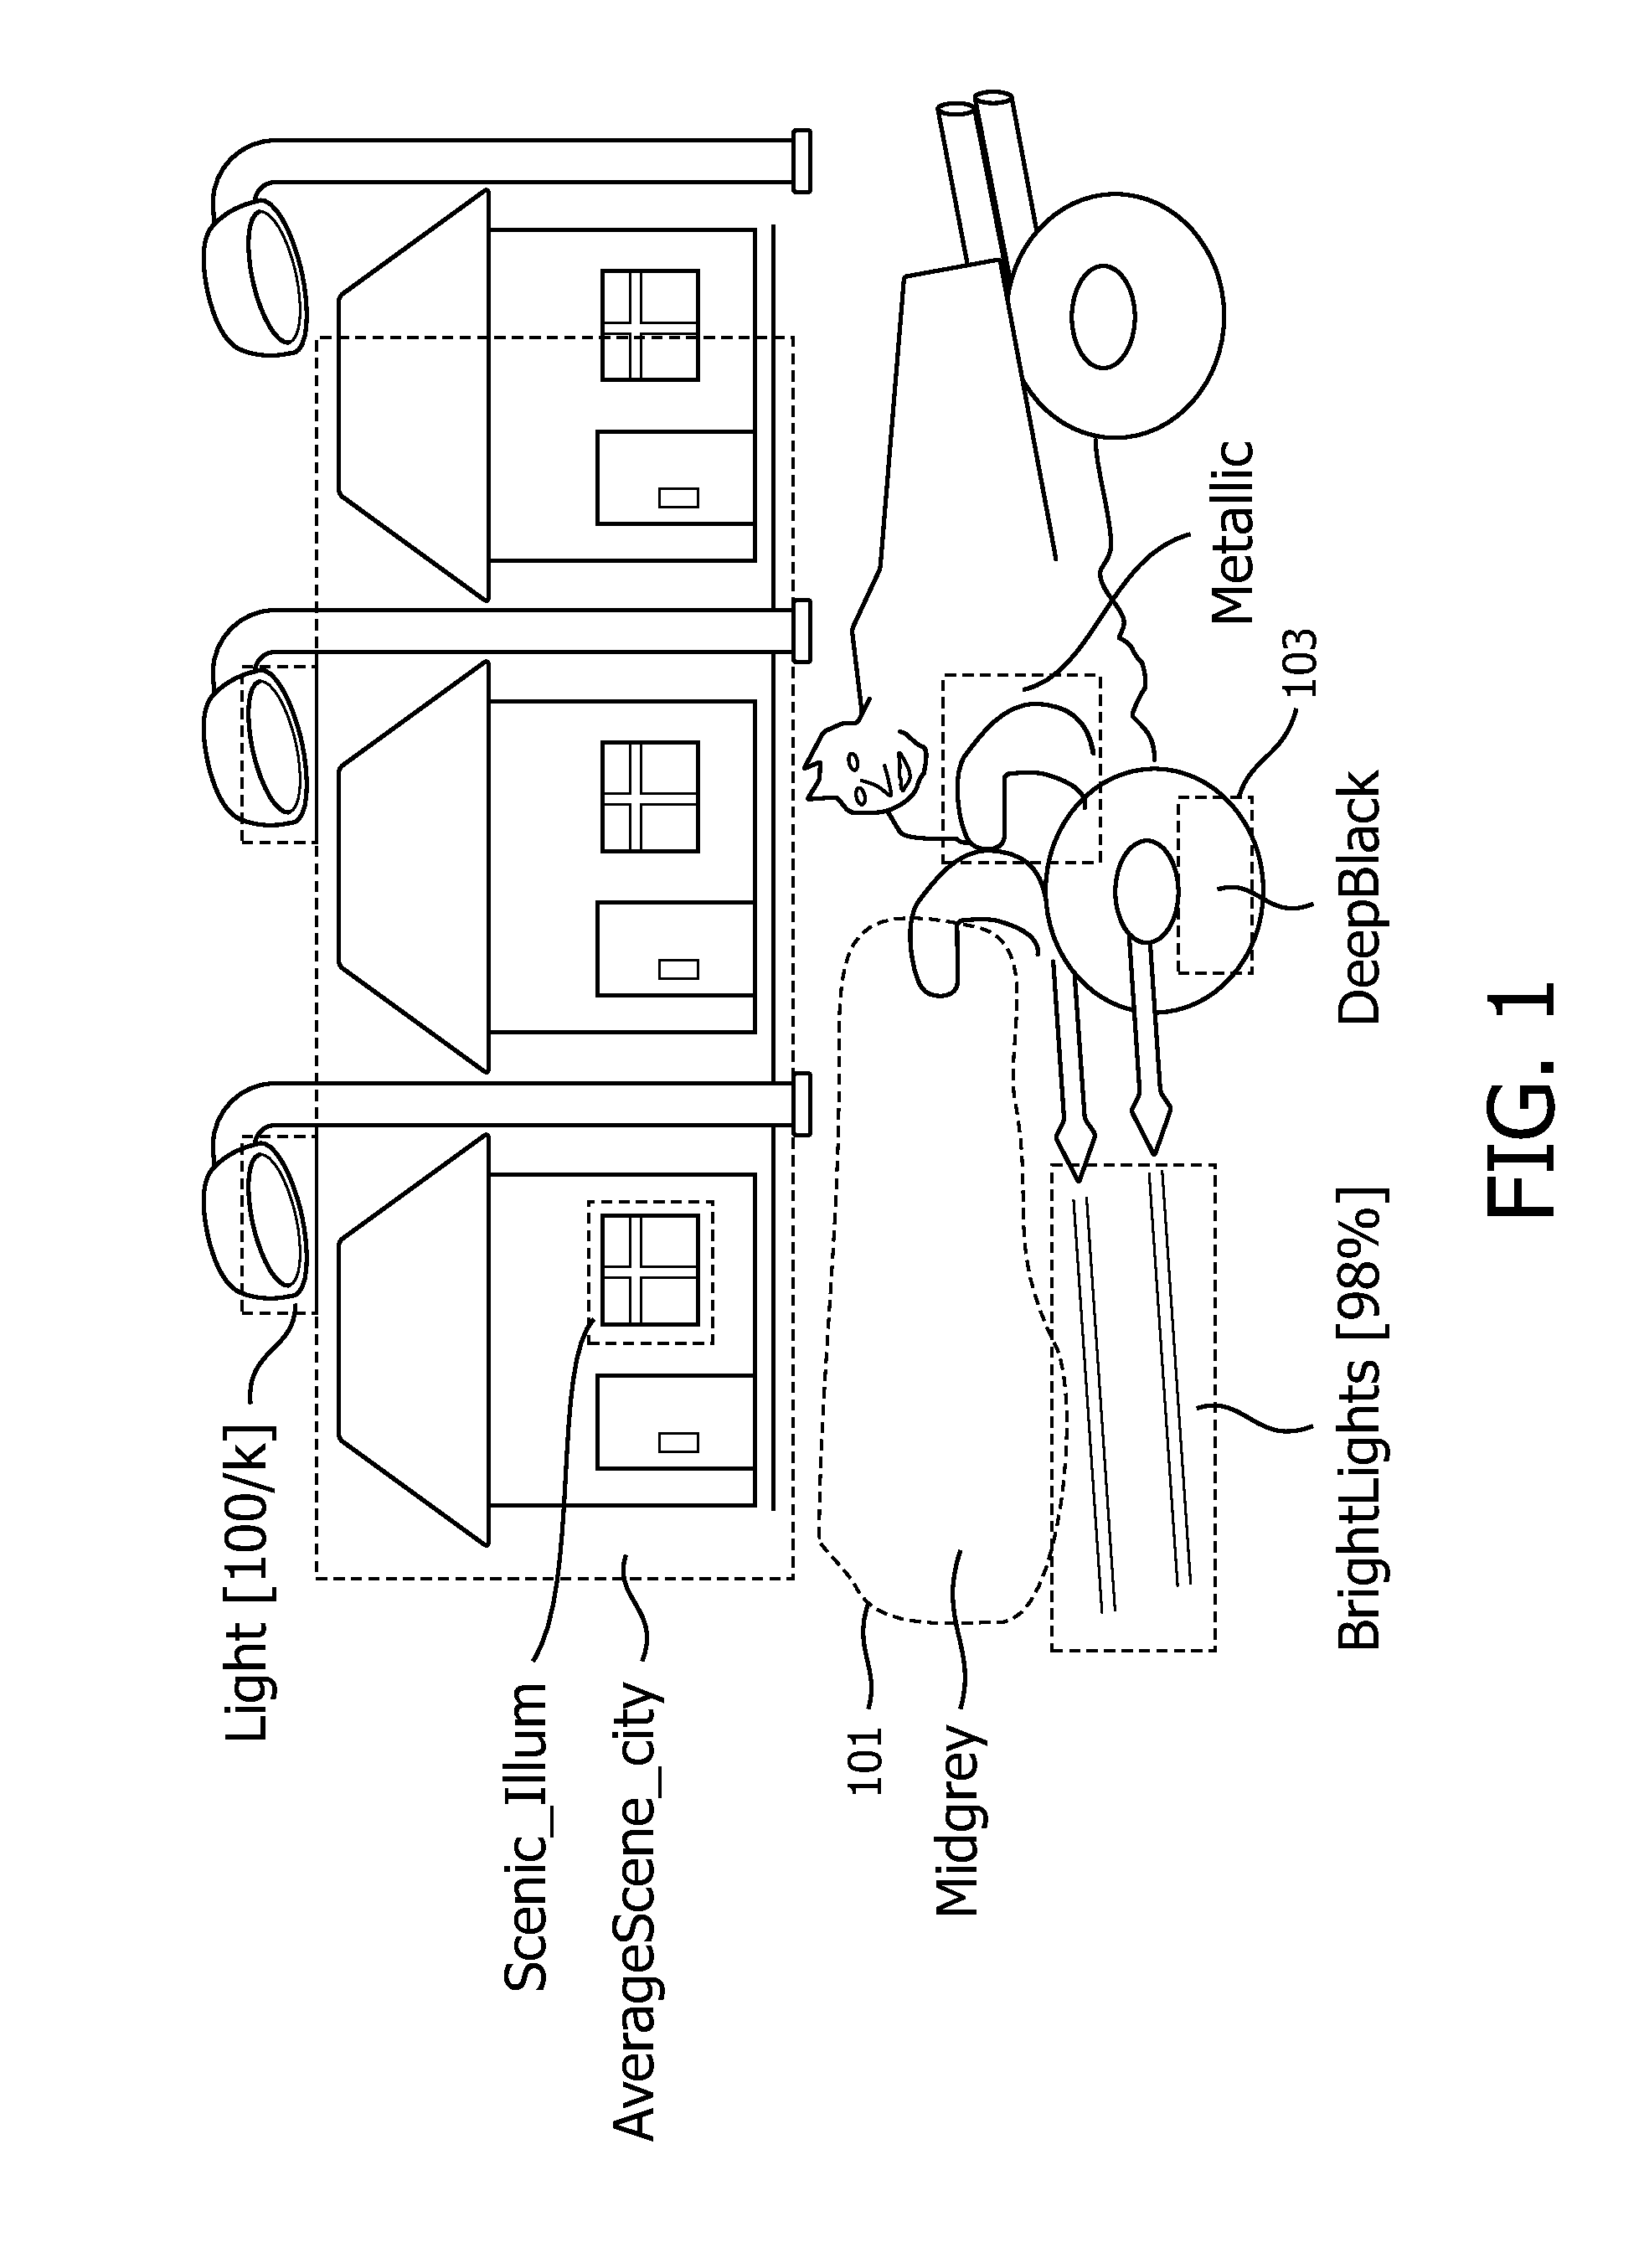 Methods and apparatuses for processing or defining luminance/color regimes